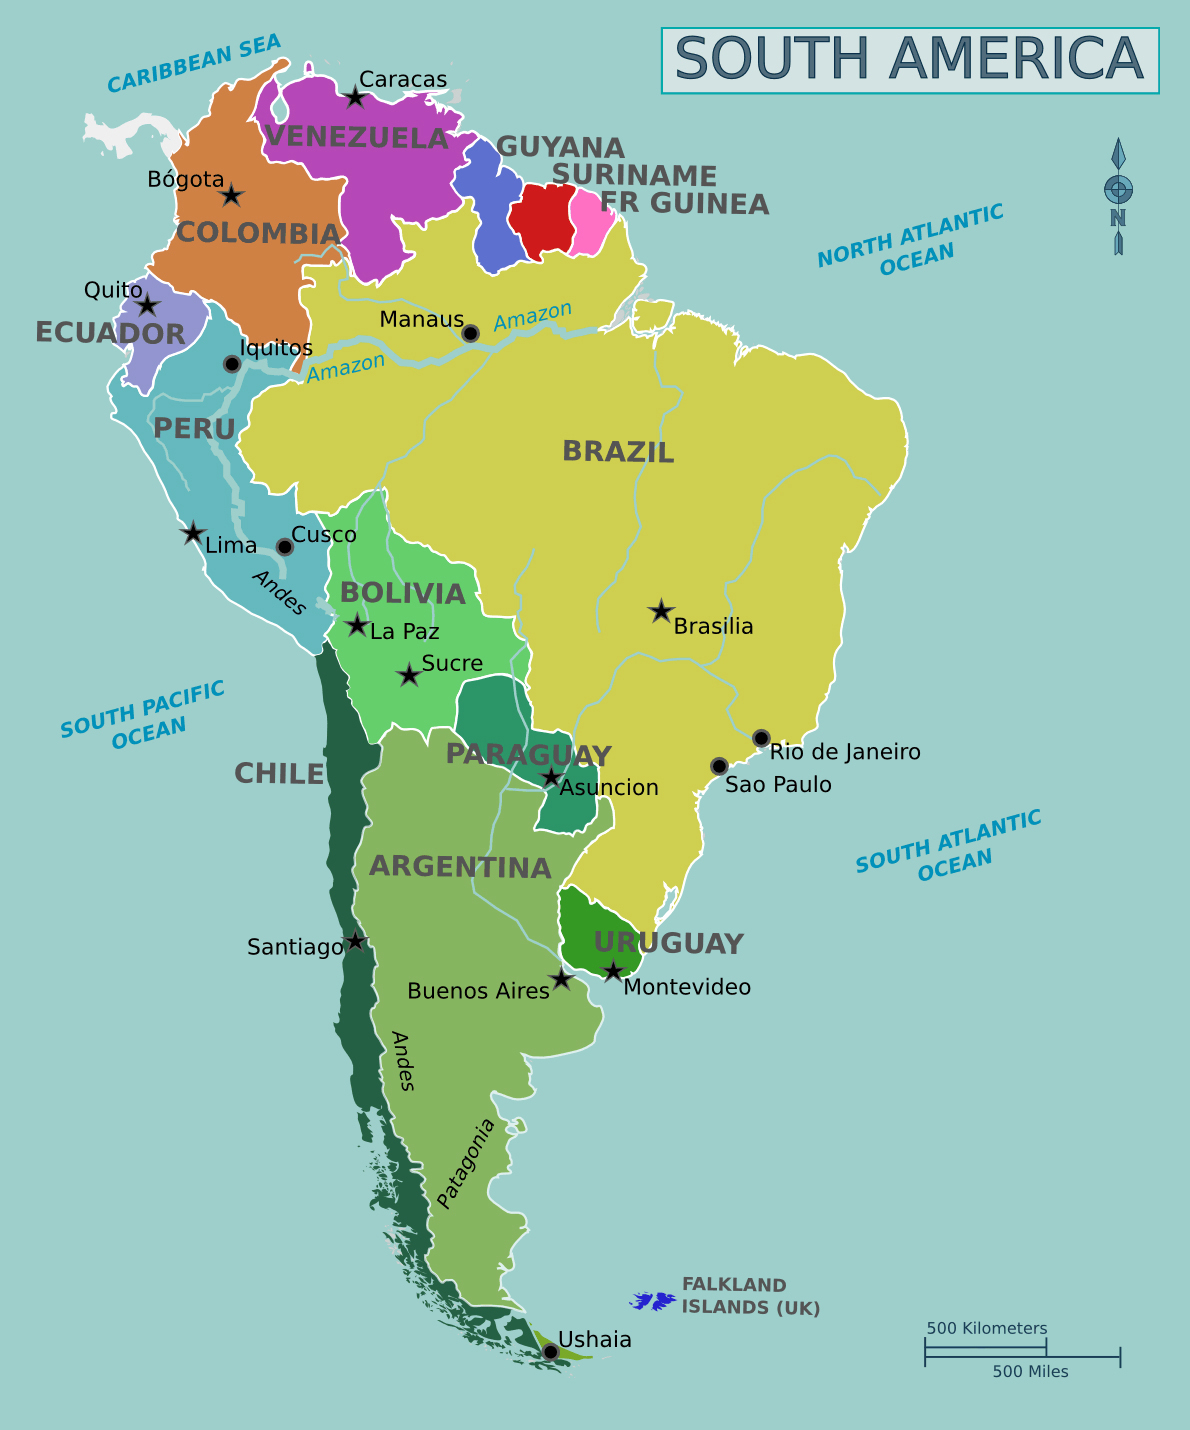 full-political-map-of-south-america-south-america-full-political-map